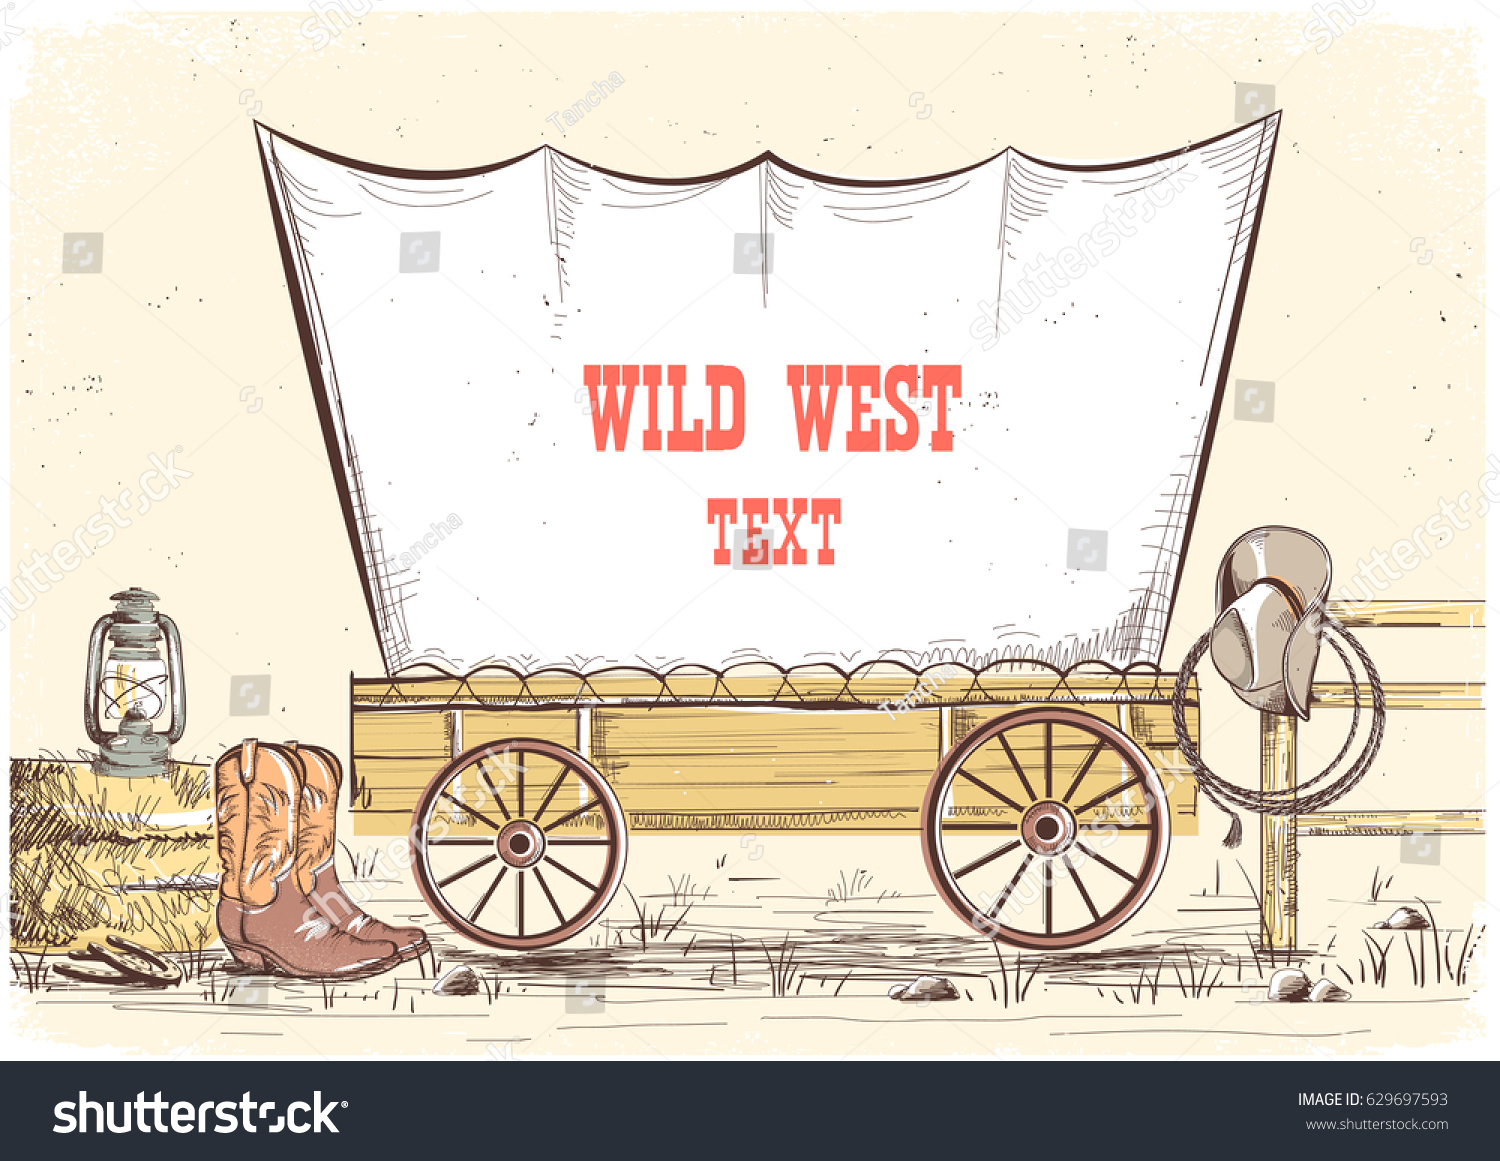 SVG of Wild west wagon.Vector hand draw cowboy illustration background for text svg